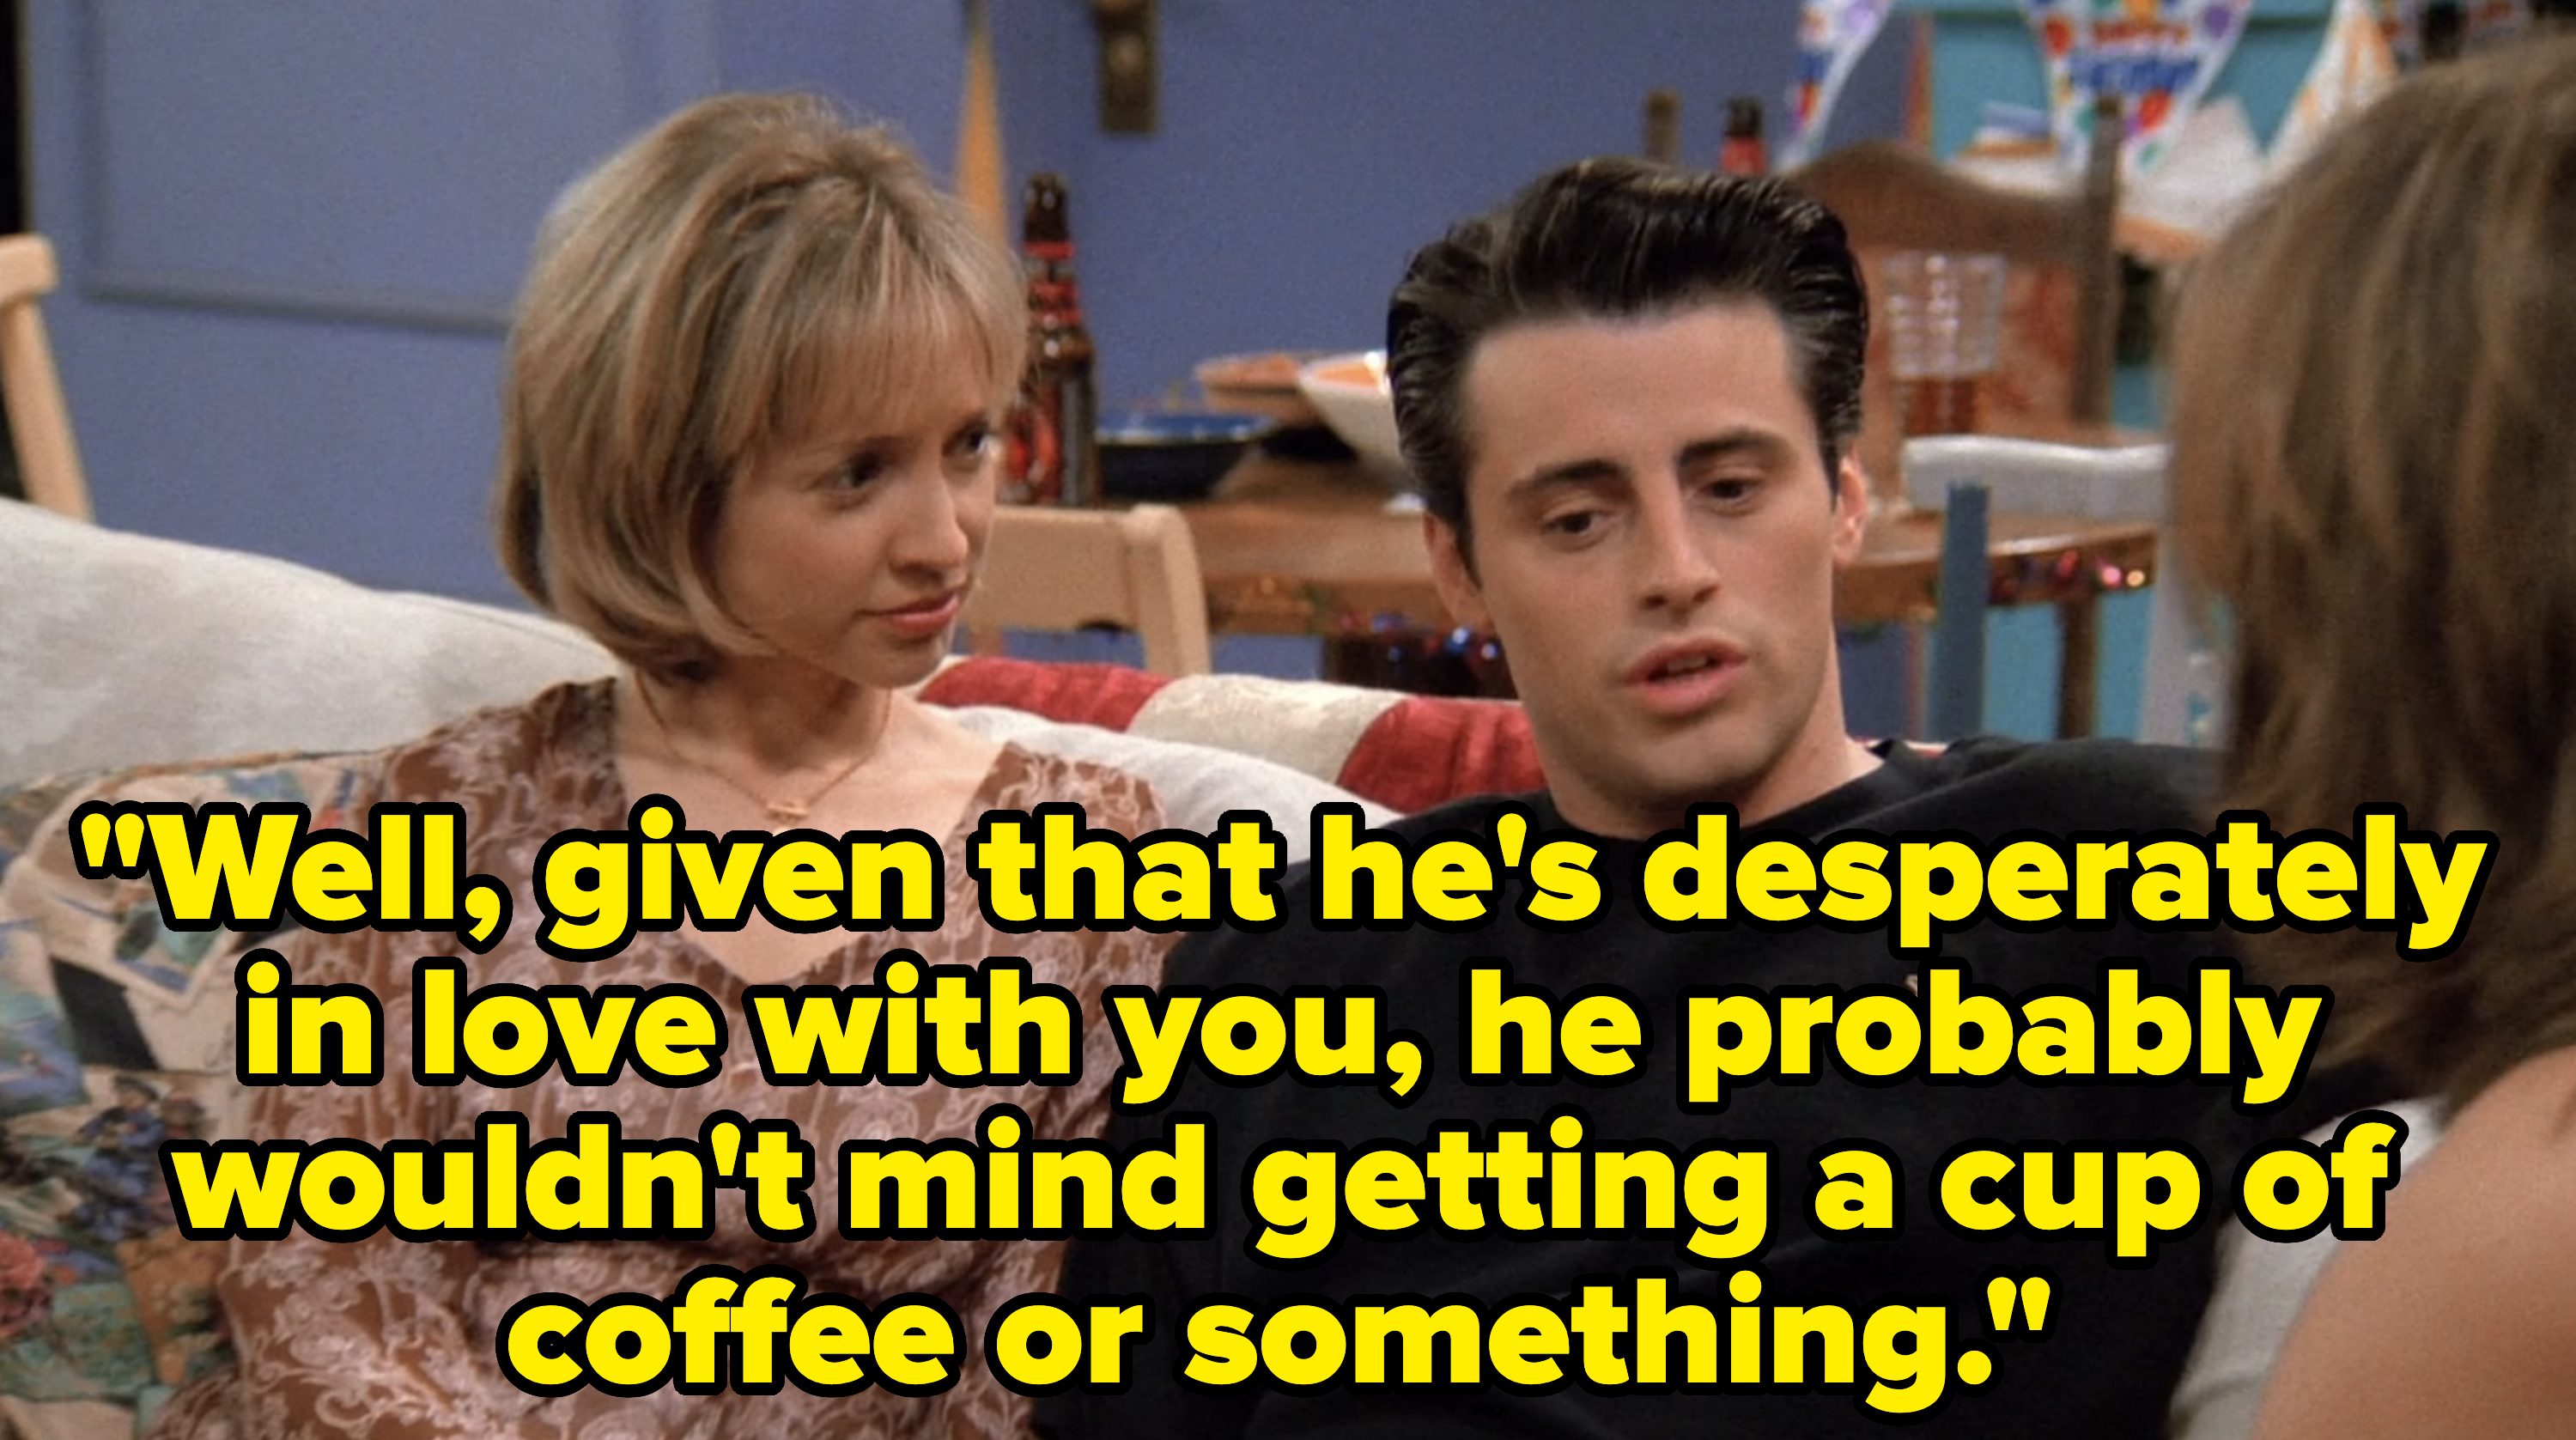 Characters from &quot;Friends&quot; sitting on a couch; Joey wearing a black sweater, woman in patterned top looking at him